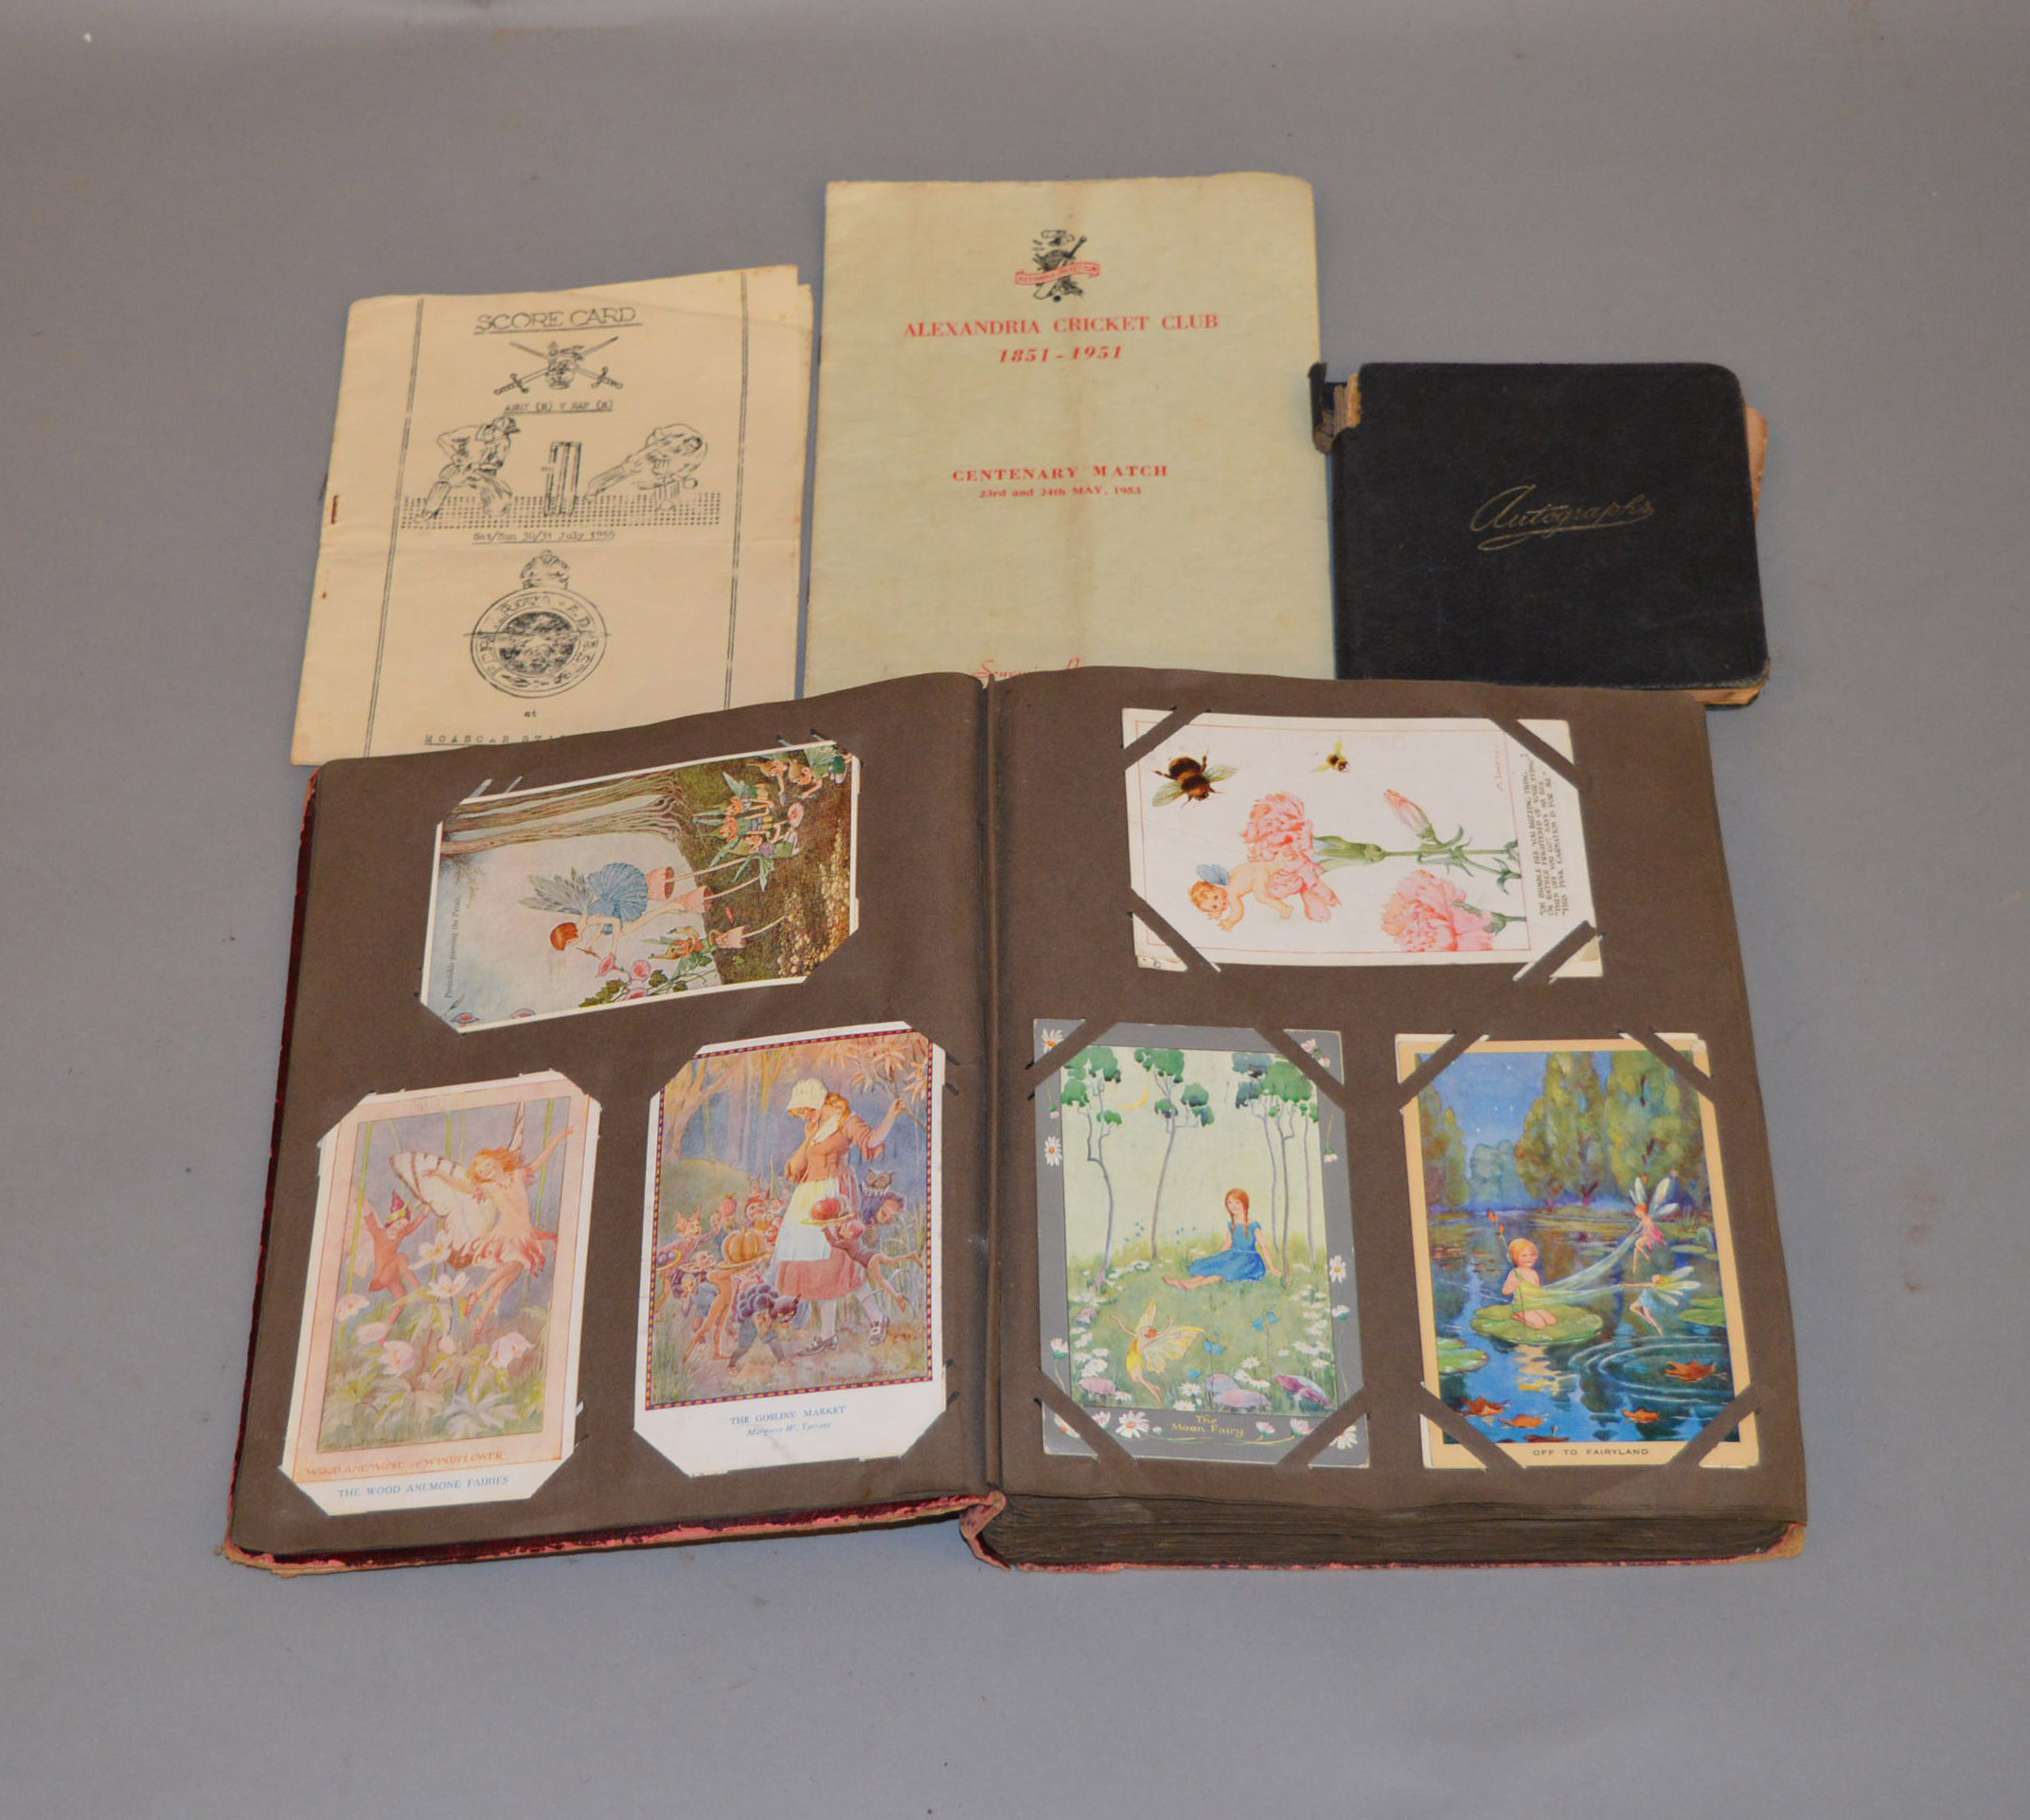 An early 20th century postcard album together with a WW1 era autograph book and two 1950s cricket